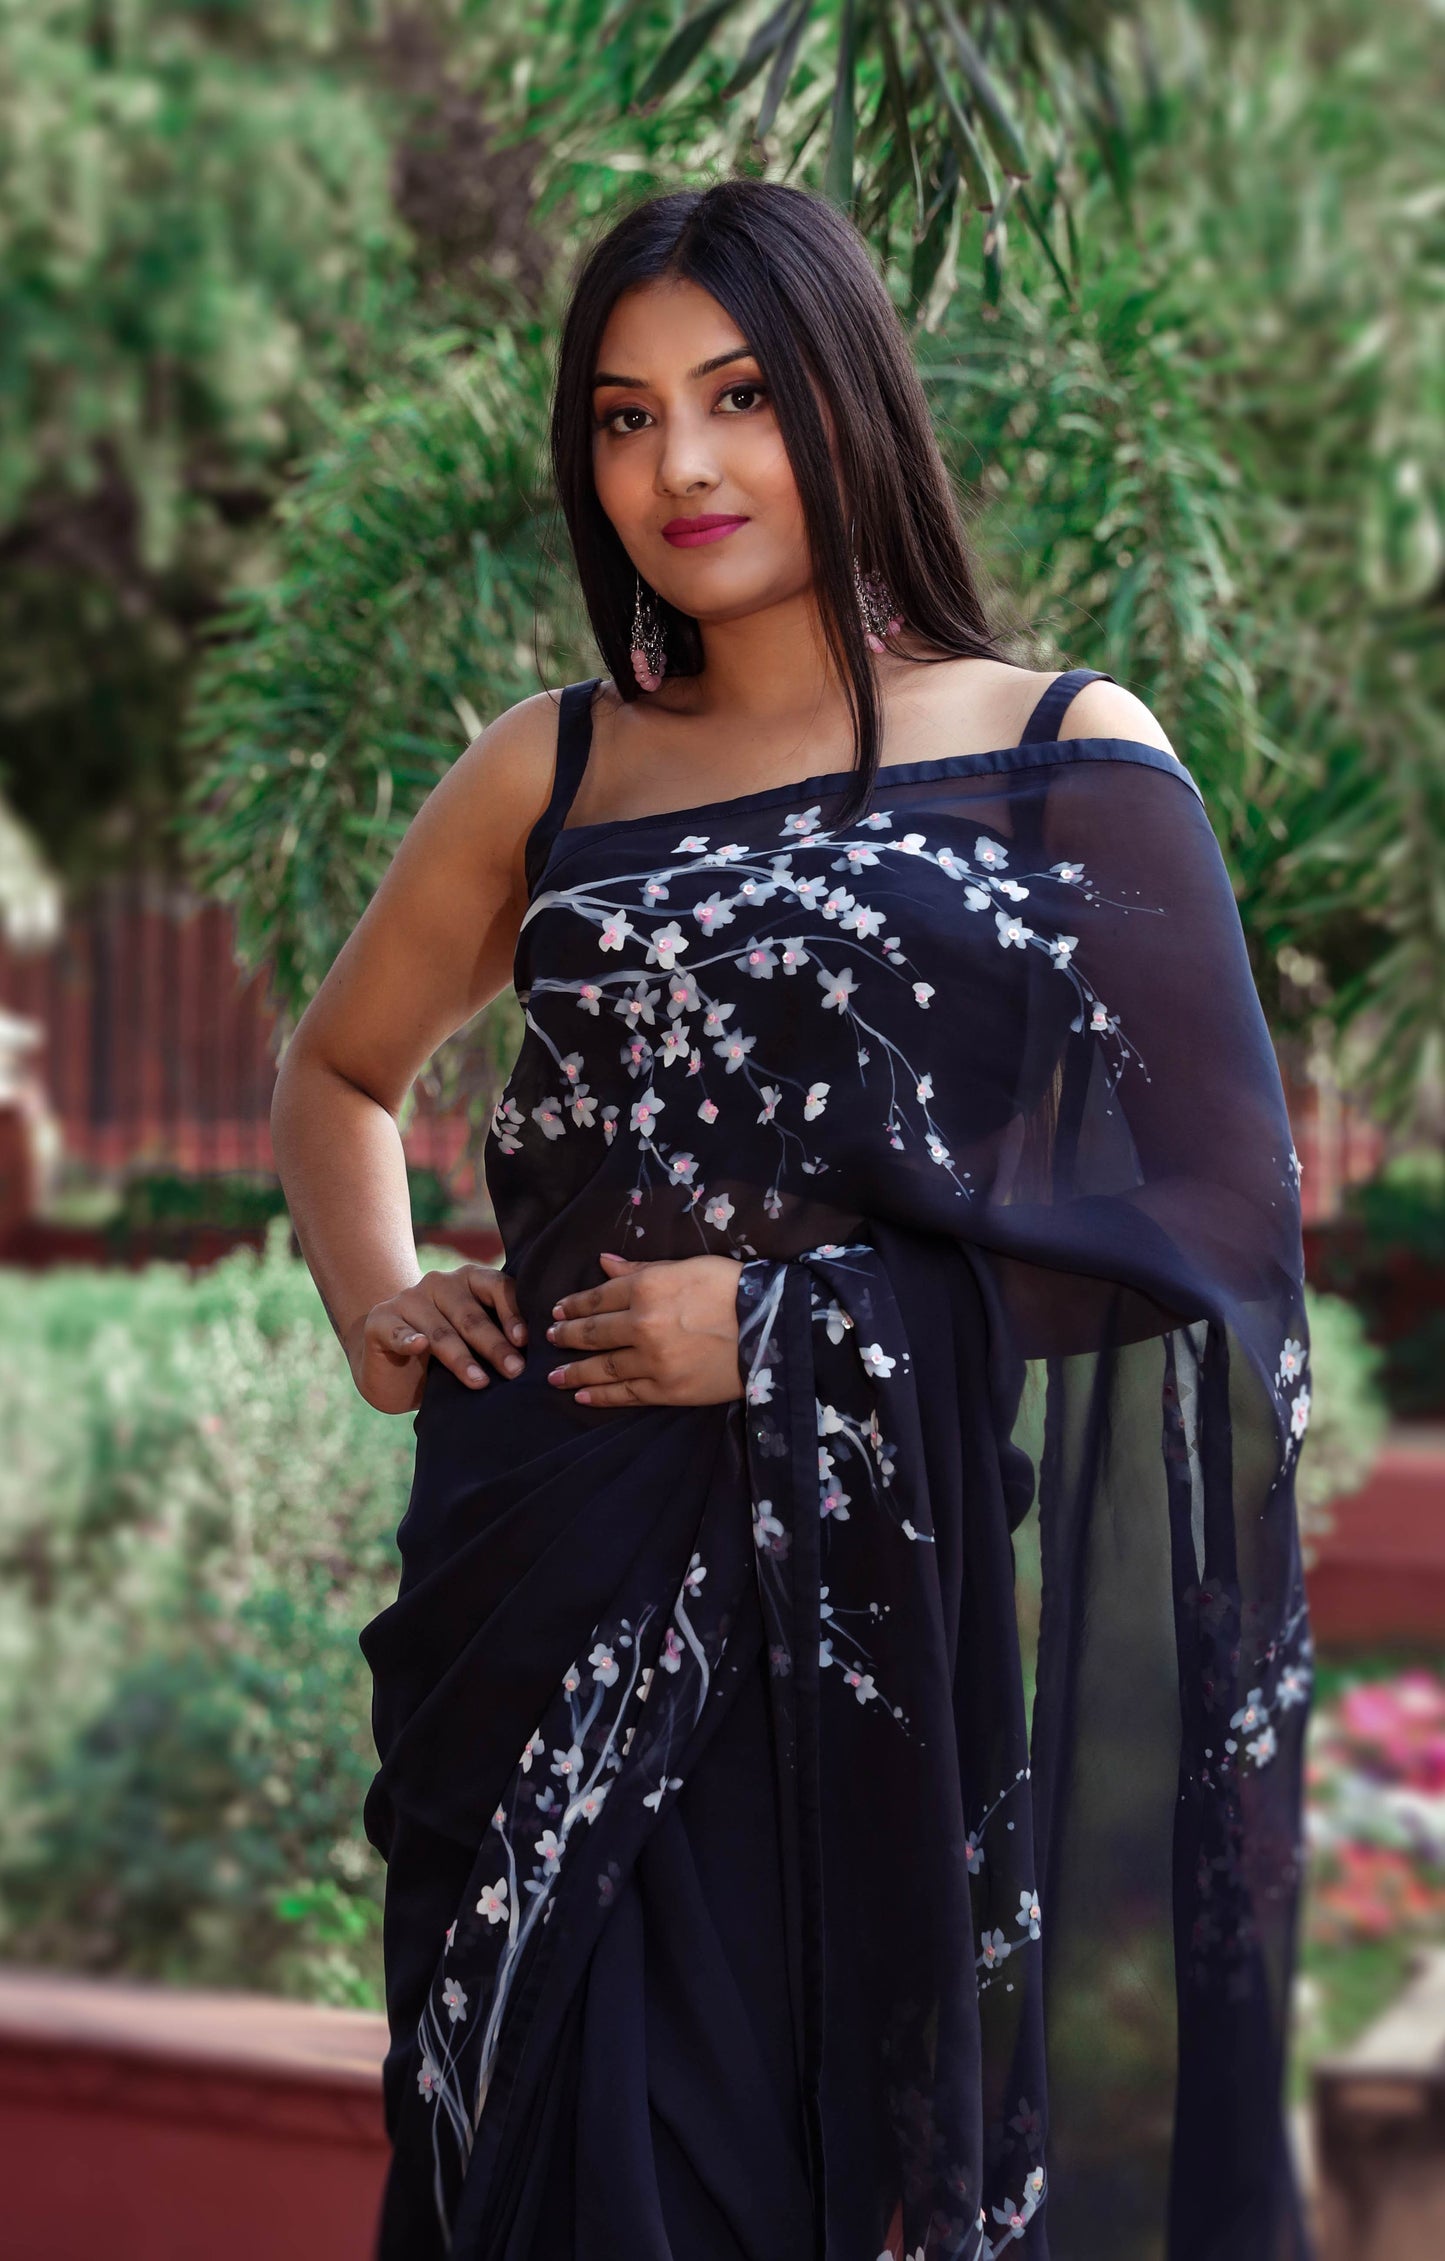 Elegant black organza saree with hand-painted floral design, perfect for parties and special occasions. Features a stunning black saree blouse design and intricate hand painting on saree. This organza saree offers a chic and stylish look, ideal for women who appreciate black saree in silk. A fashionable choice for black saree party wear